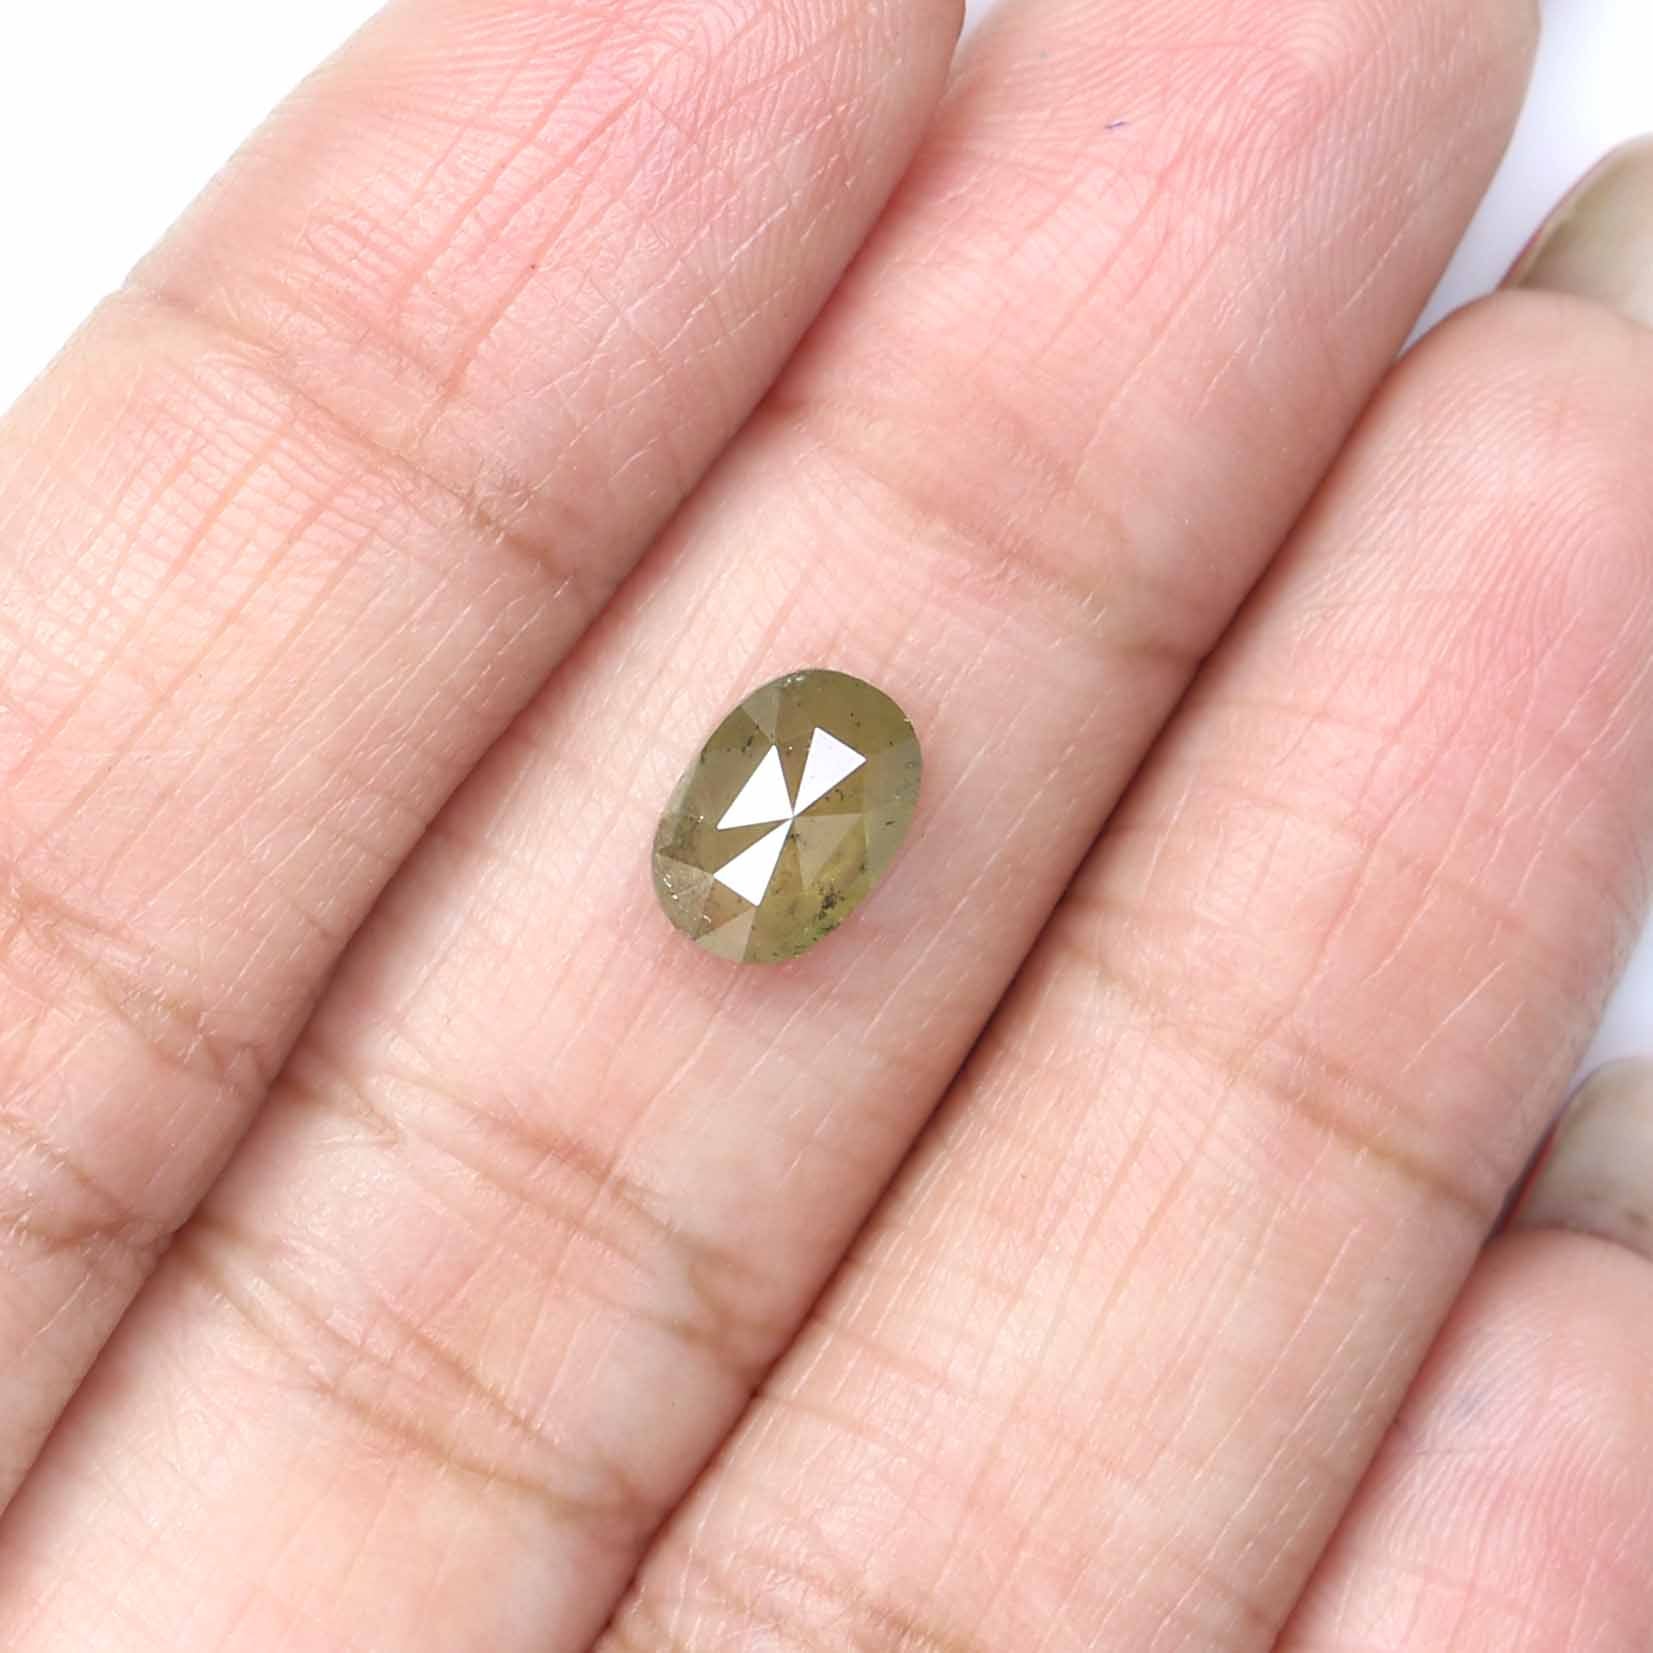 Natural Loose oval Diamond Yellow Grey Color 1.08 CT 7.90 MM oval Rose Cut Shape Diamond KR1915